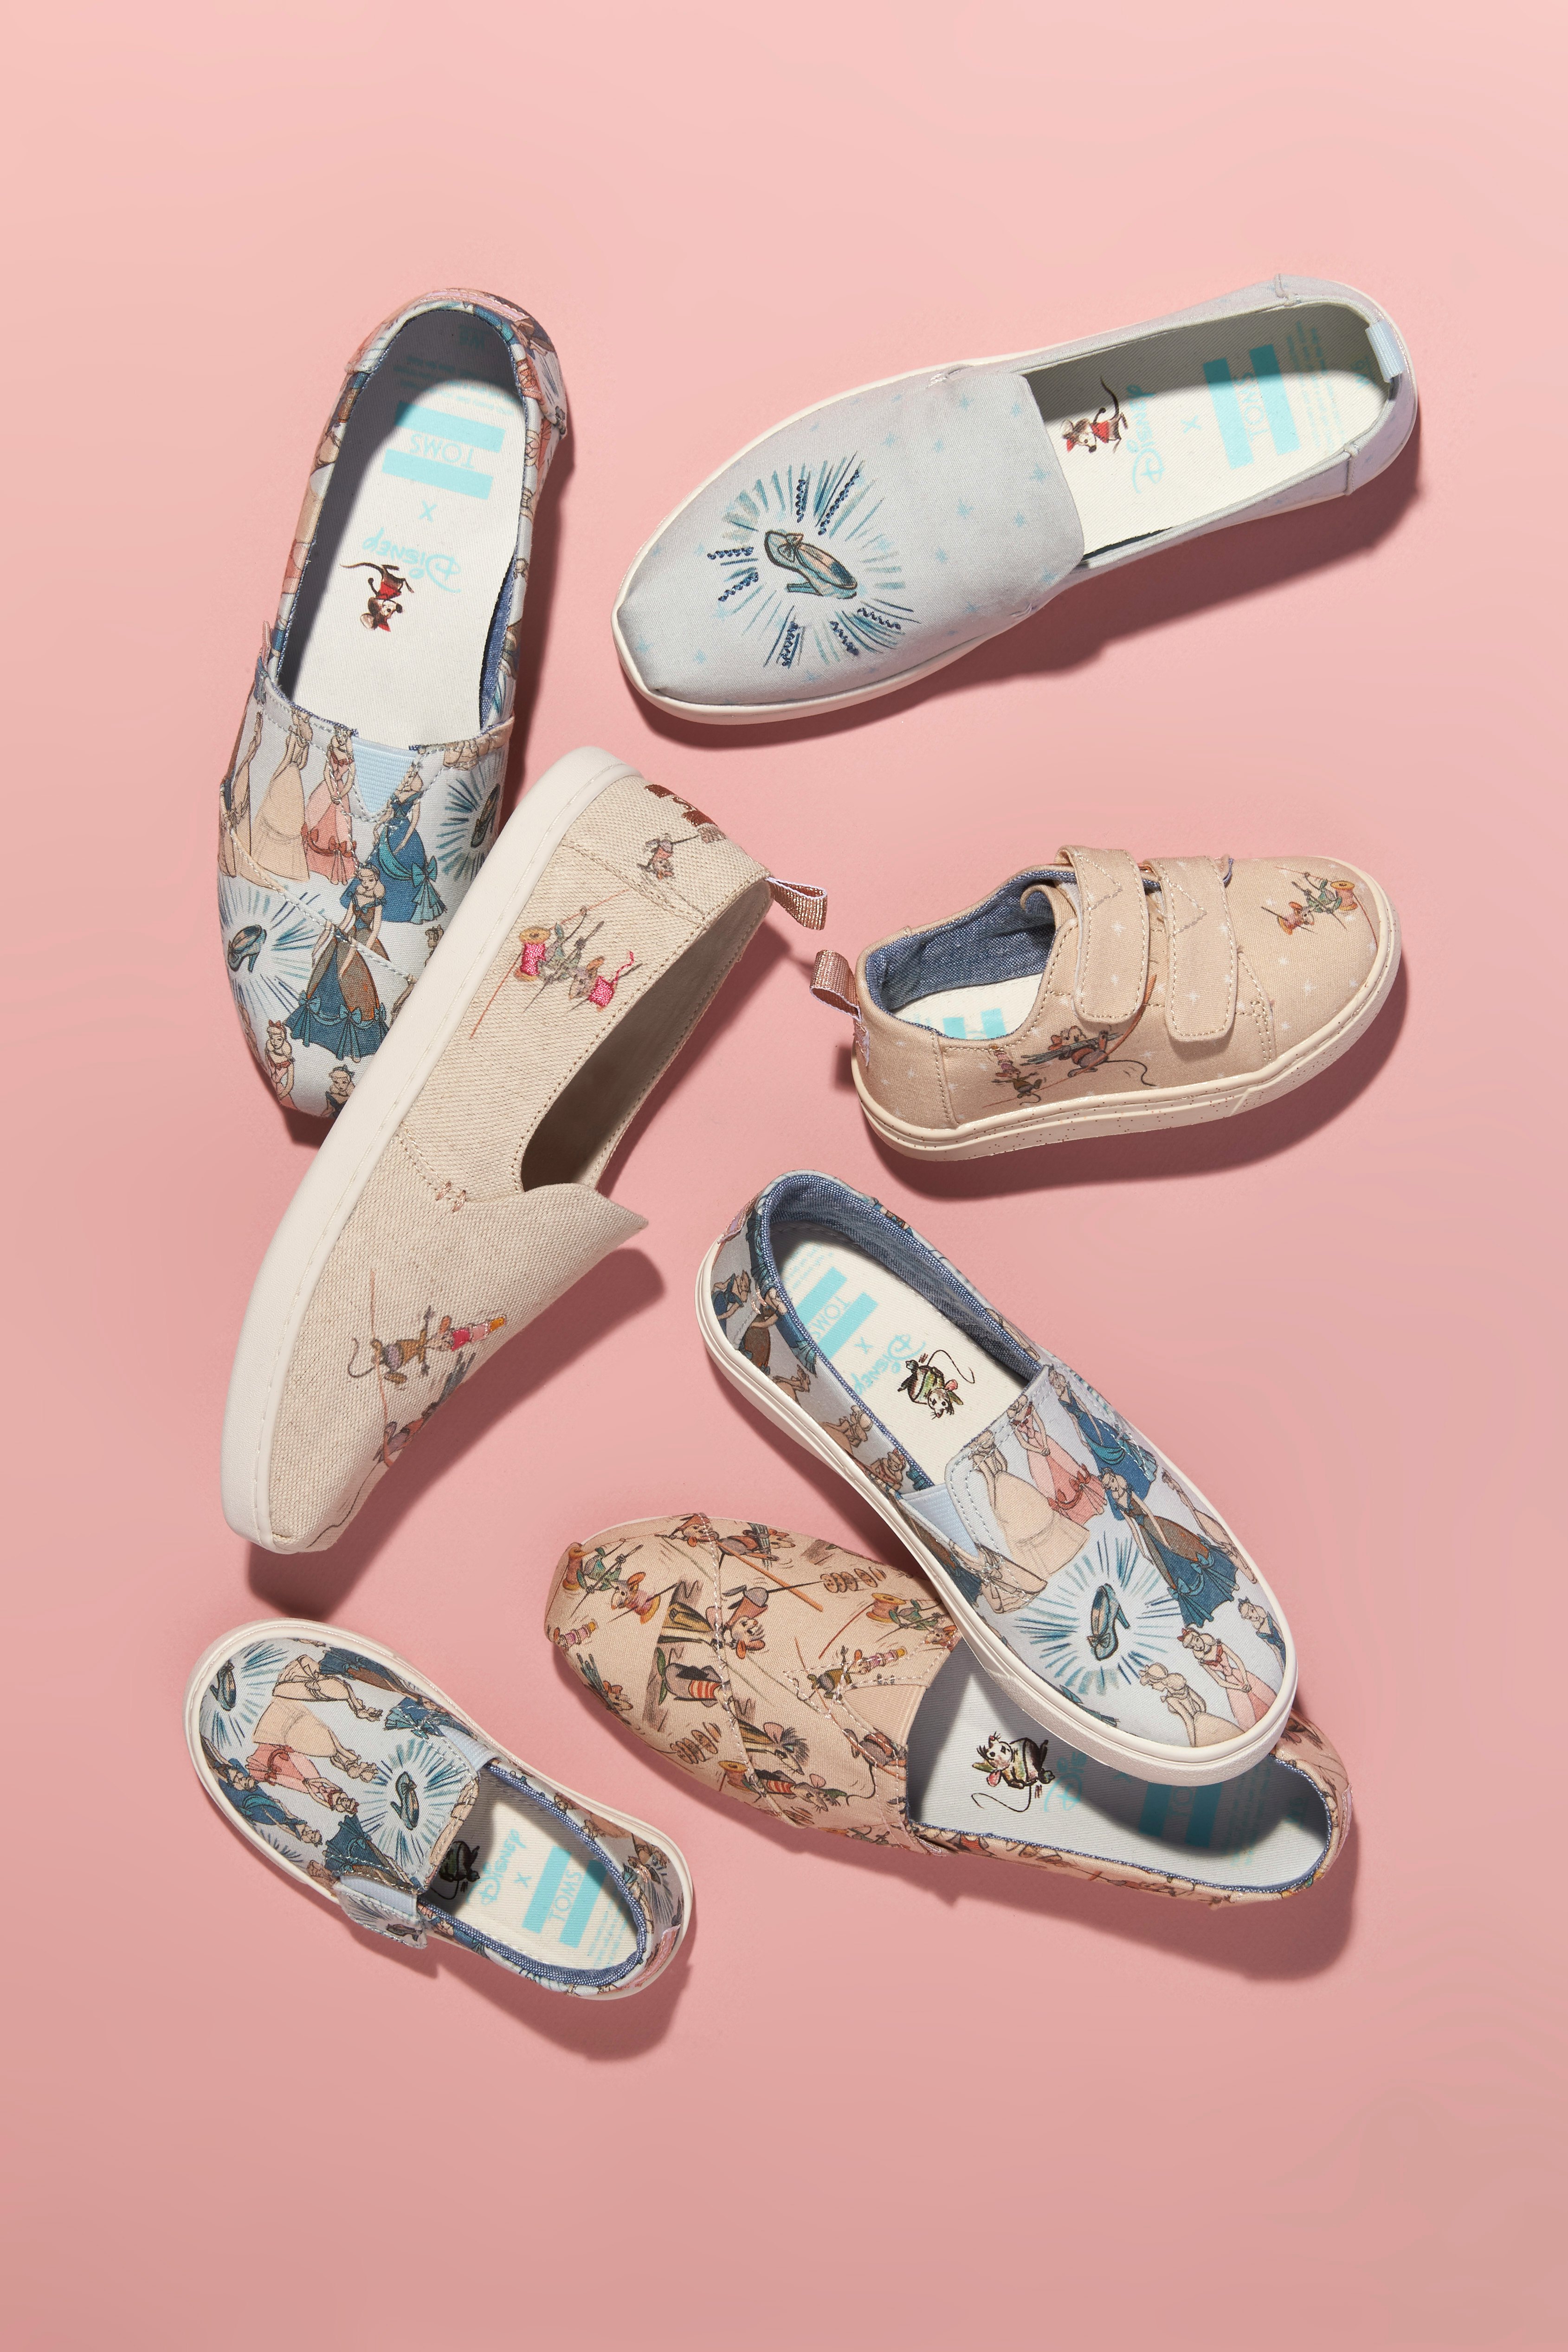 Disney x TOMS Shoes Release Date Is 